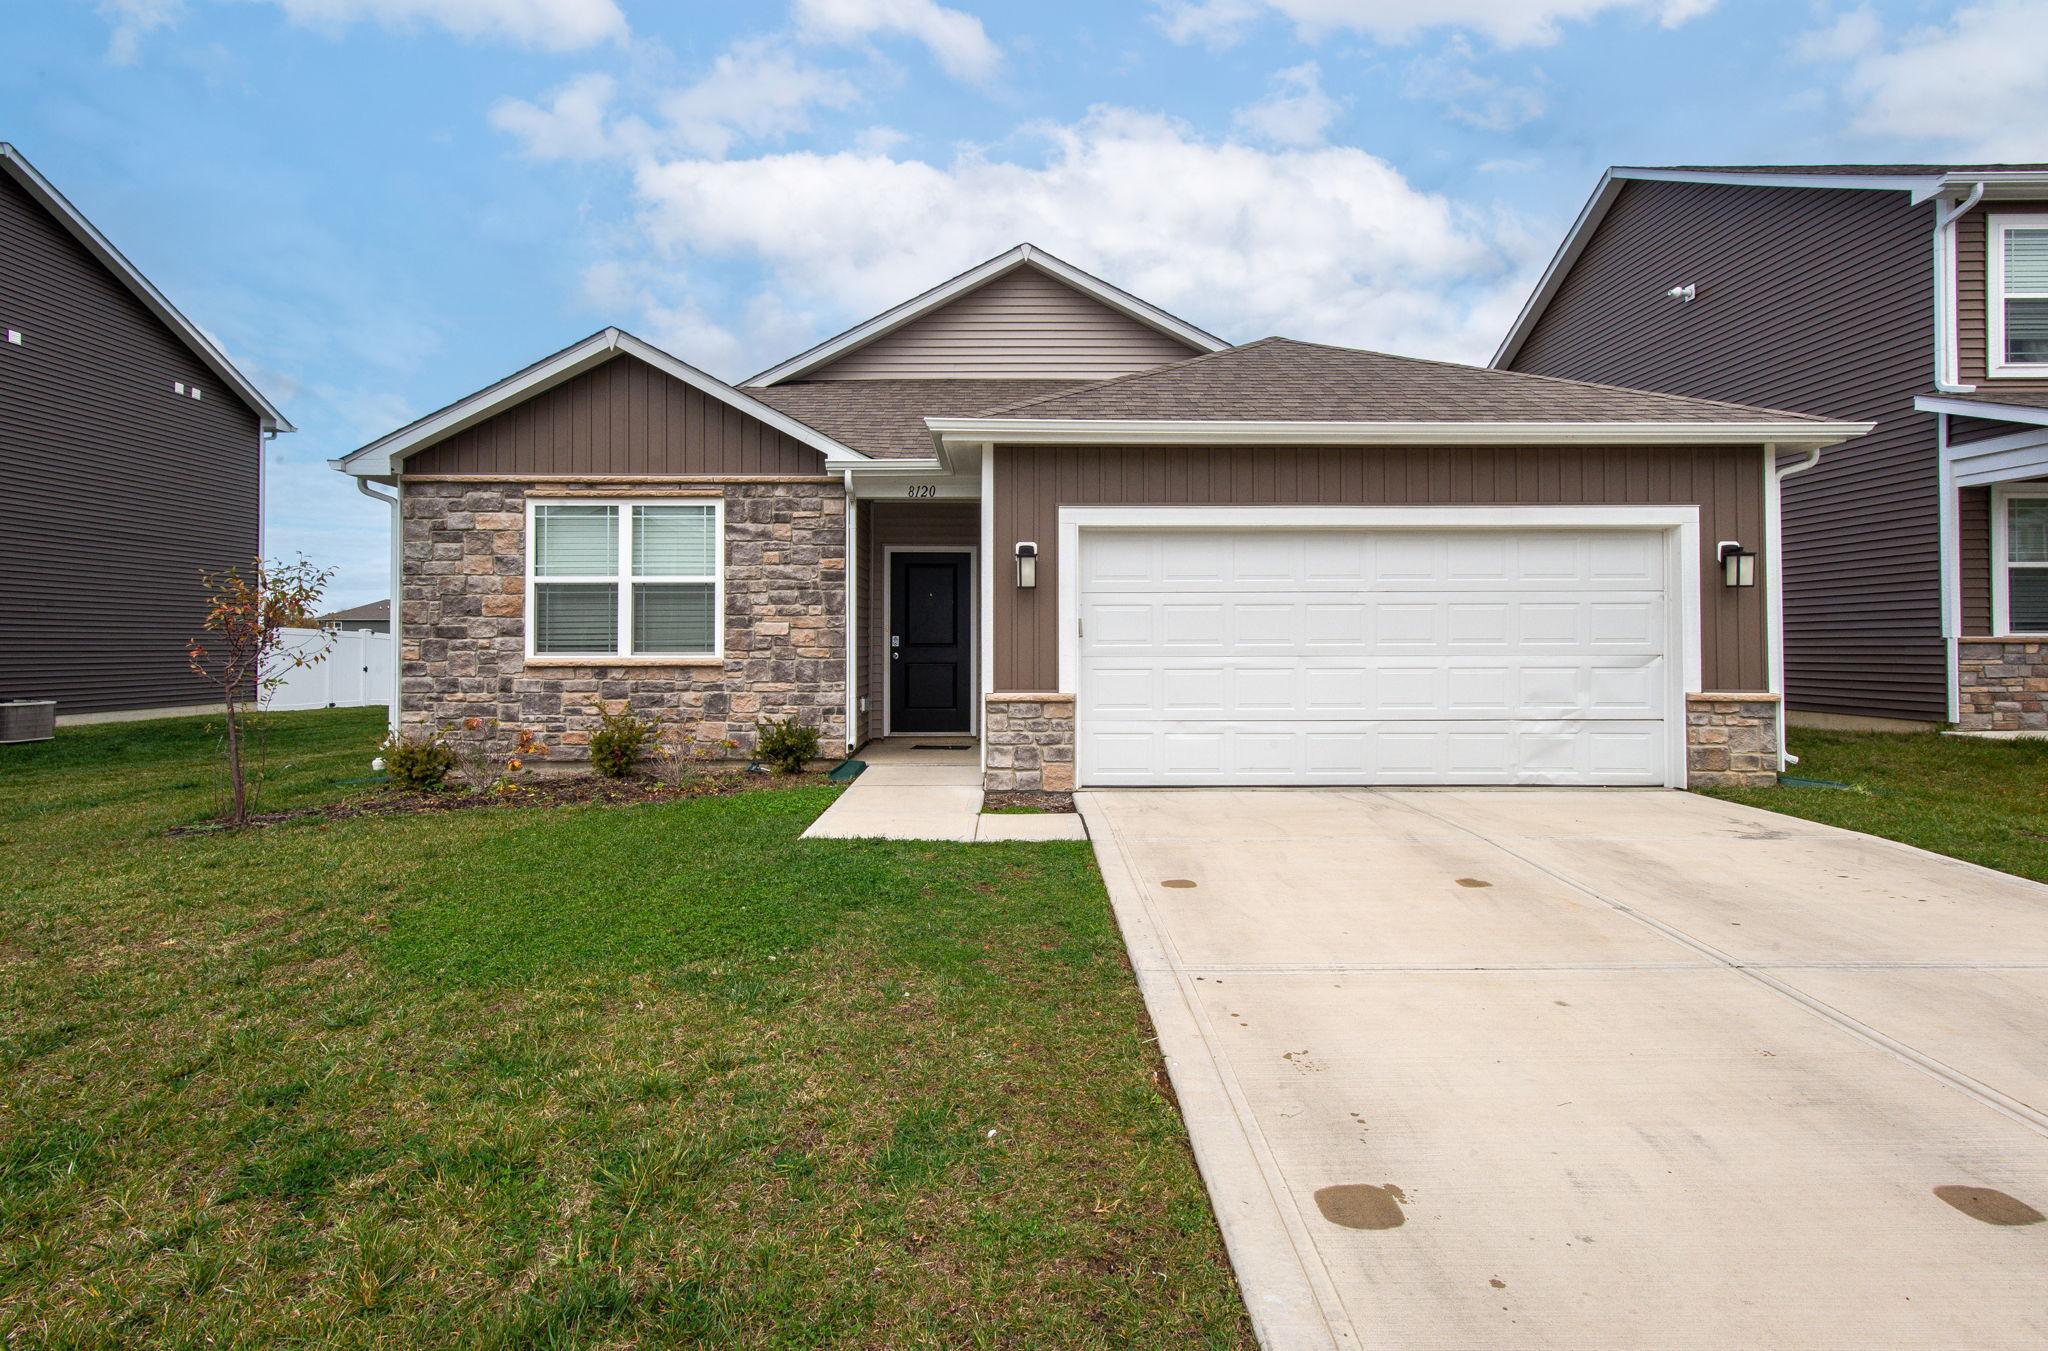 Photo one of 8120 Trailstay Dr Camby IN 46113 | MLS 21951405